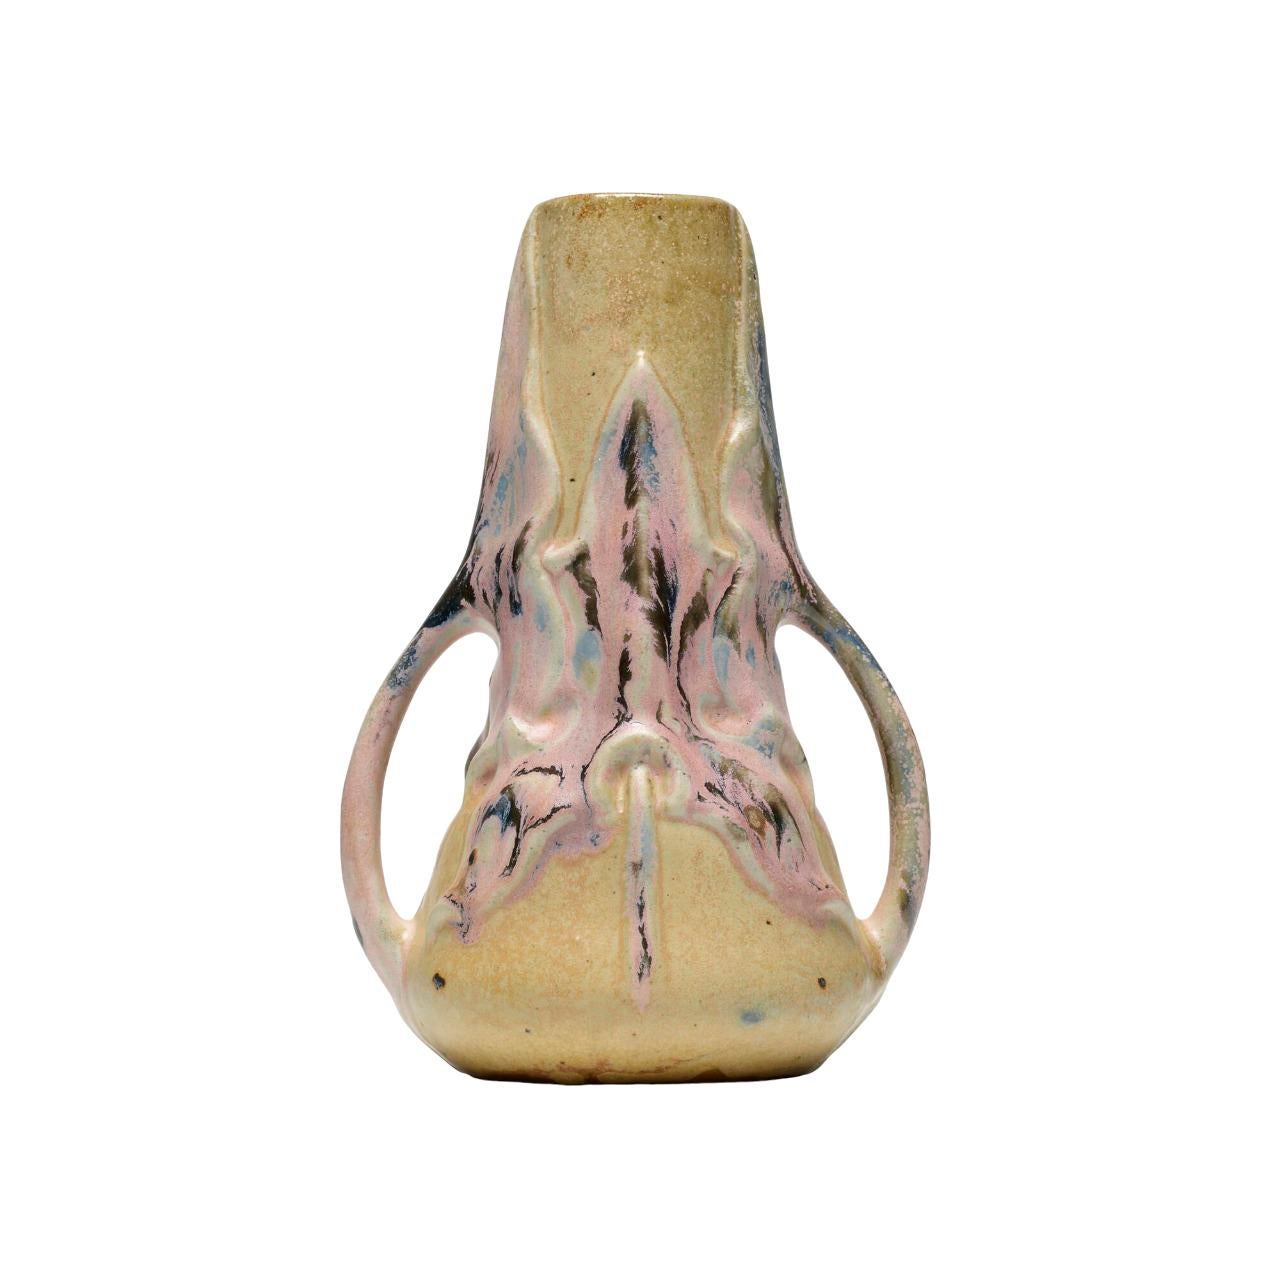 French ART NOUVEAU two-handled GREBER Vase, with some pink flashes, refined ceramic For Sale